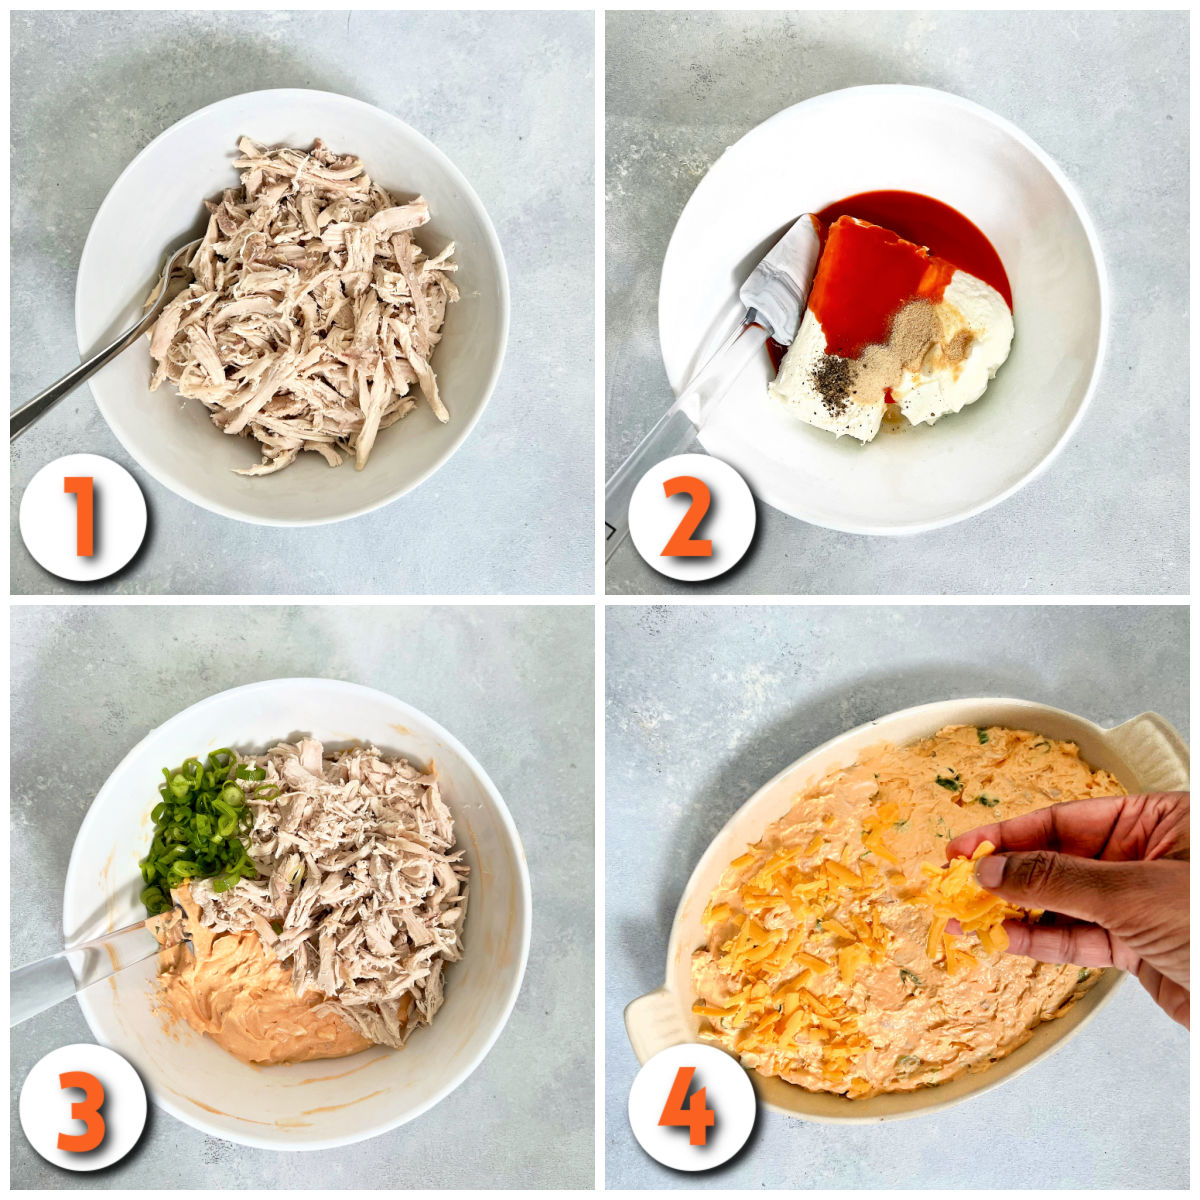 Steps 1-4 how to make buffalo chicken dip.